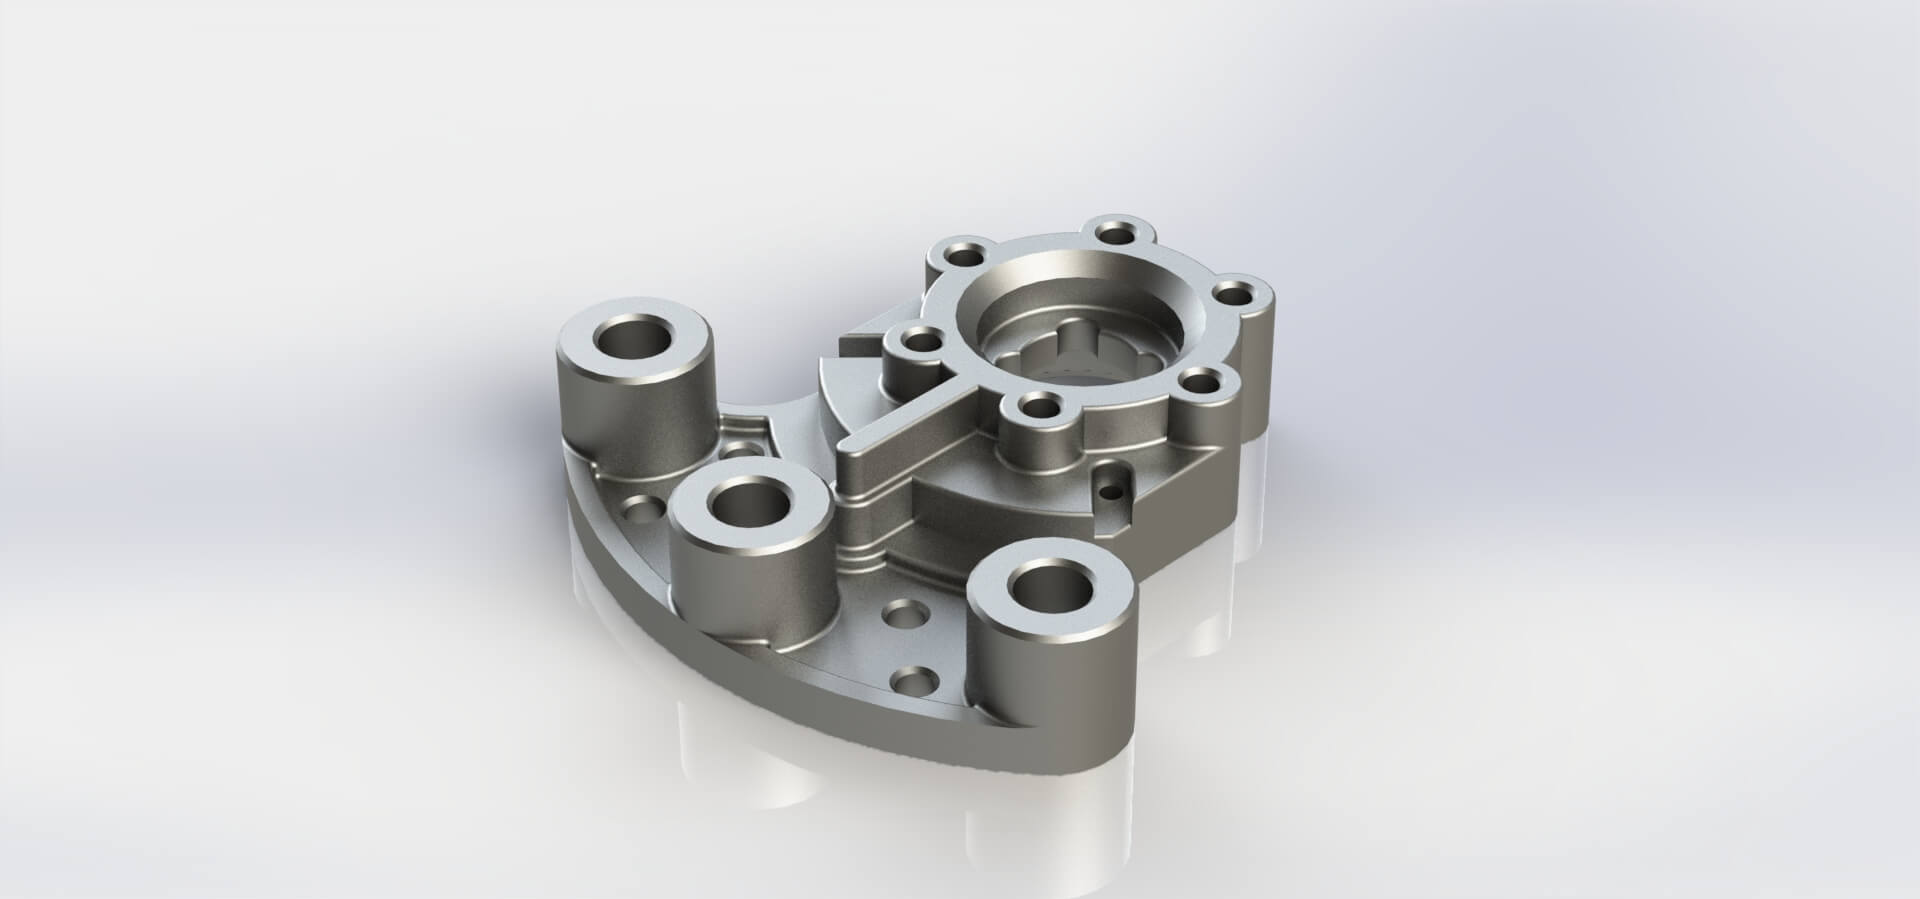 A Comprehensive Guide To CNC Machining And Its Applications